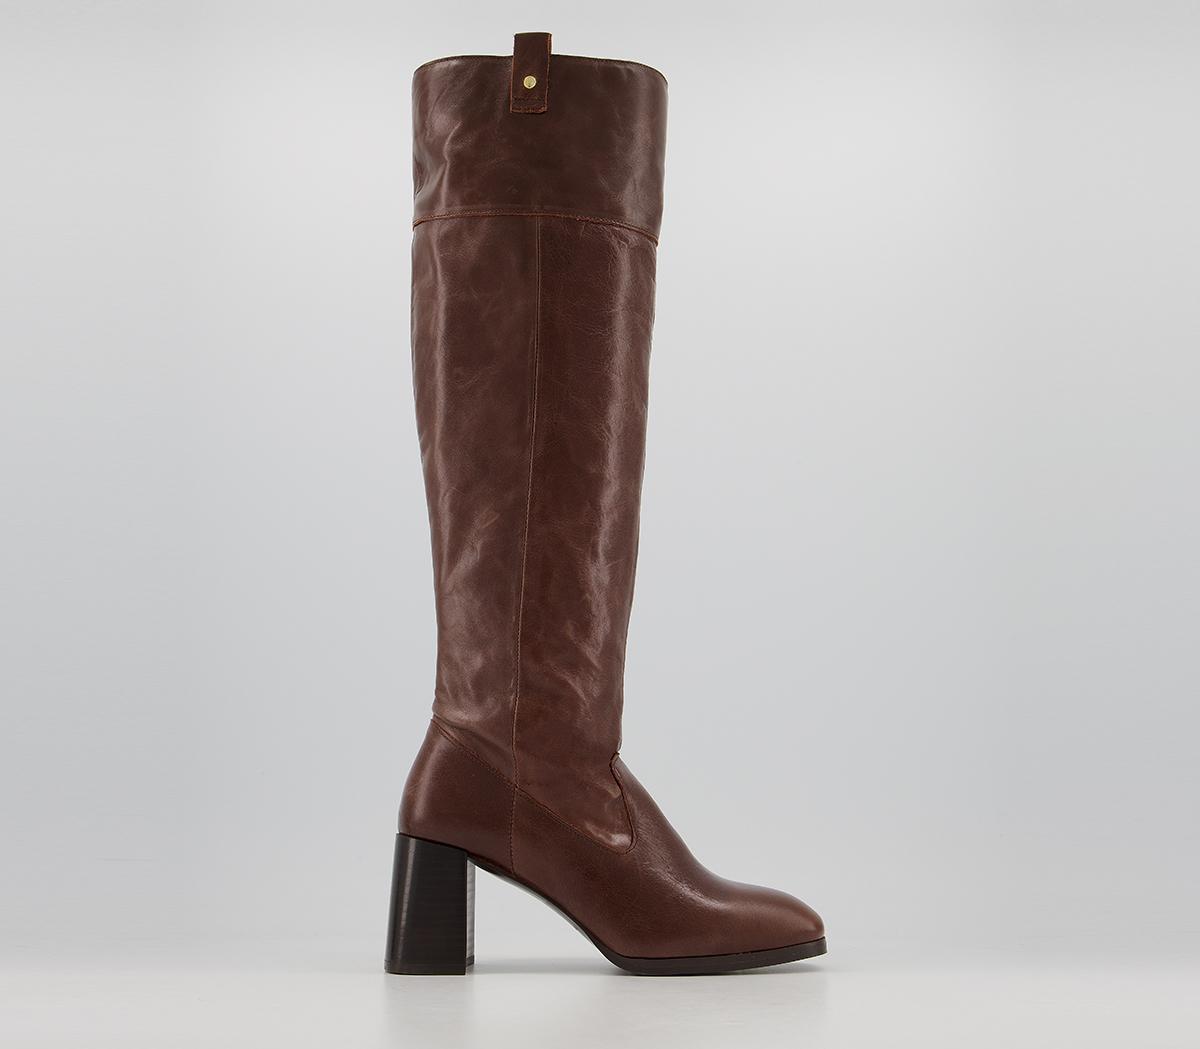 OFFICE Kacey Platform Knee Boots Chocolate Leather - Knee High Boots